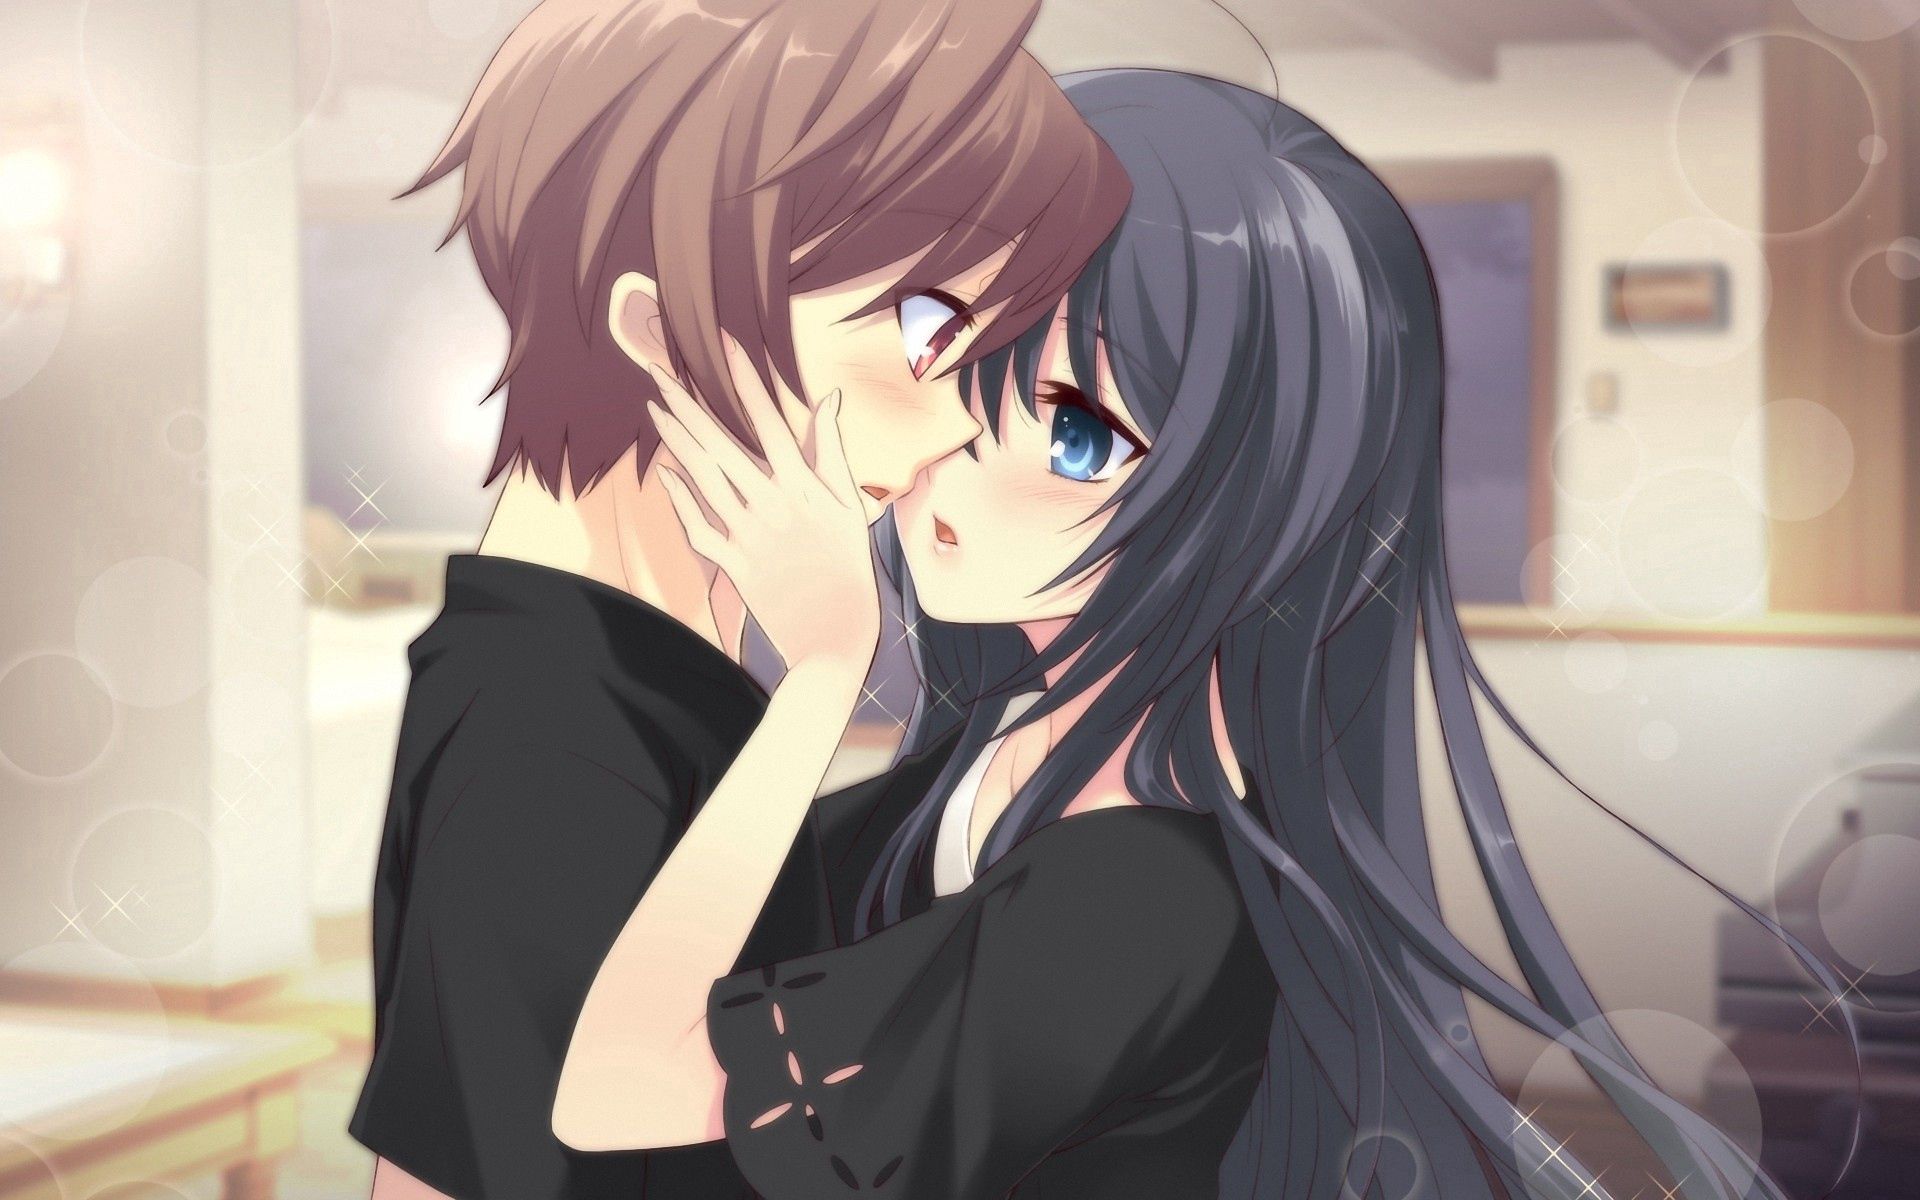 139556 download wallpaper kiss, anime, girl, tenderness, guy screensavers and pictures for free